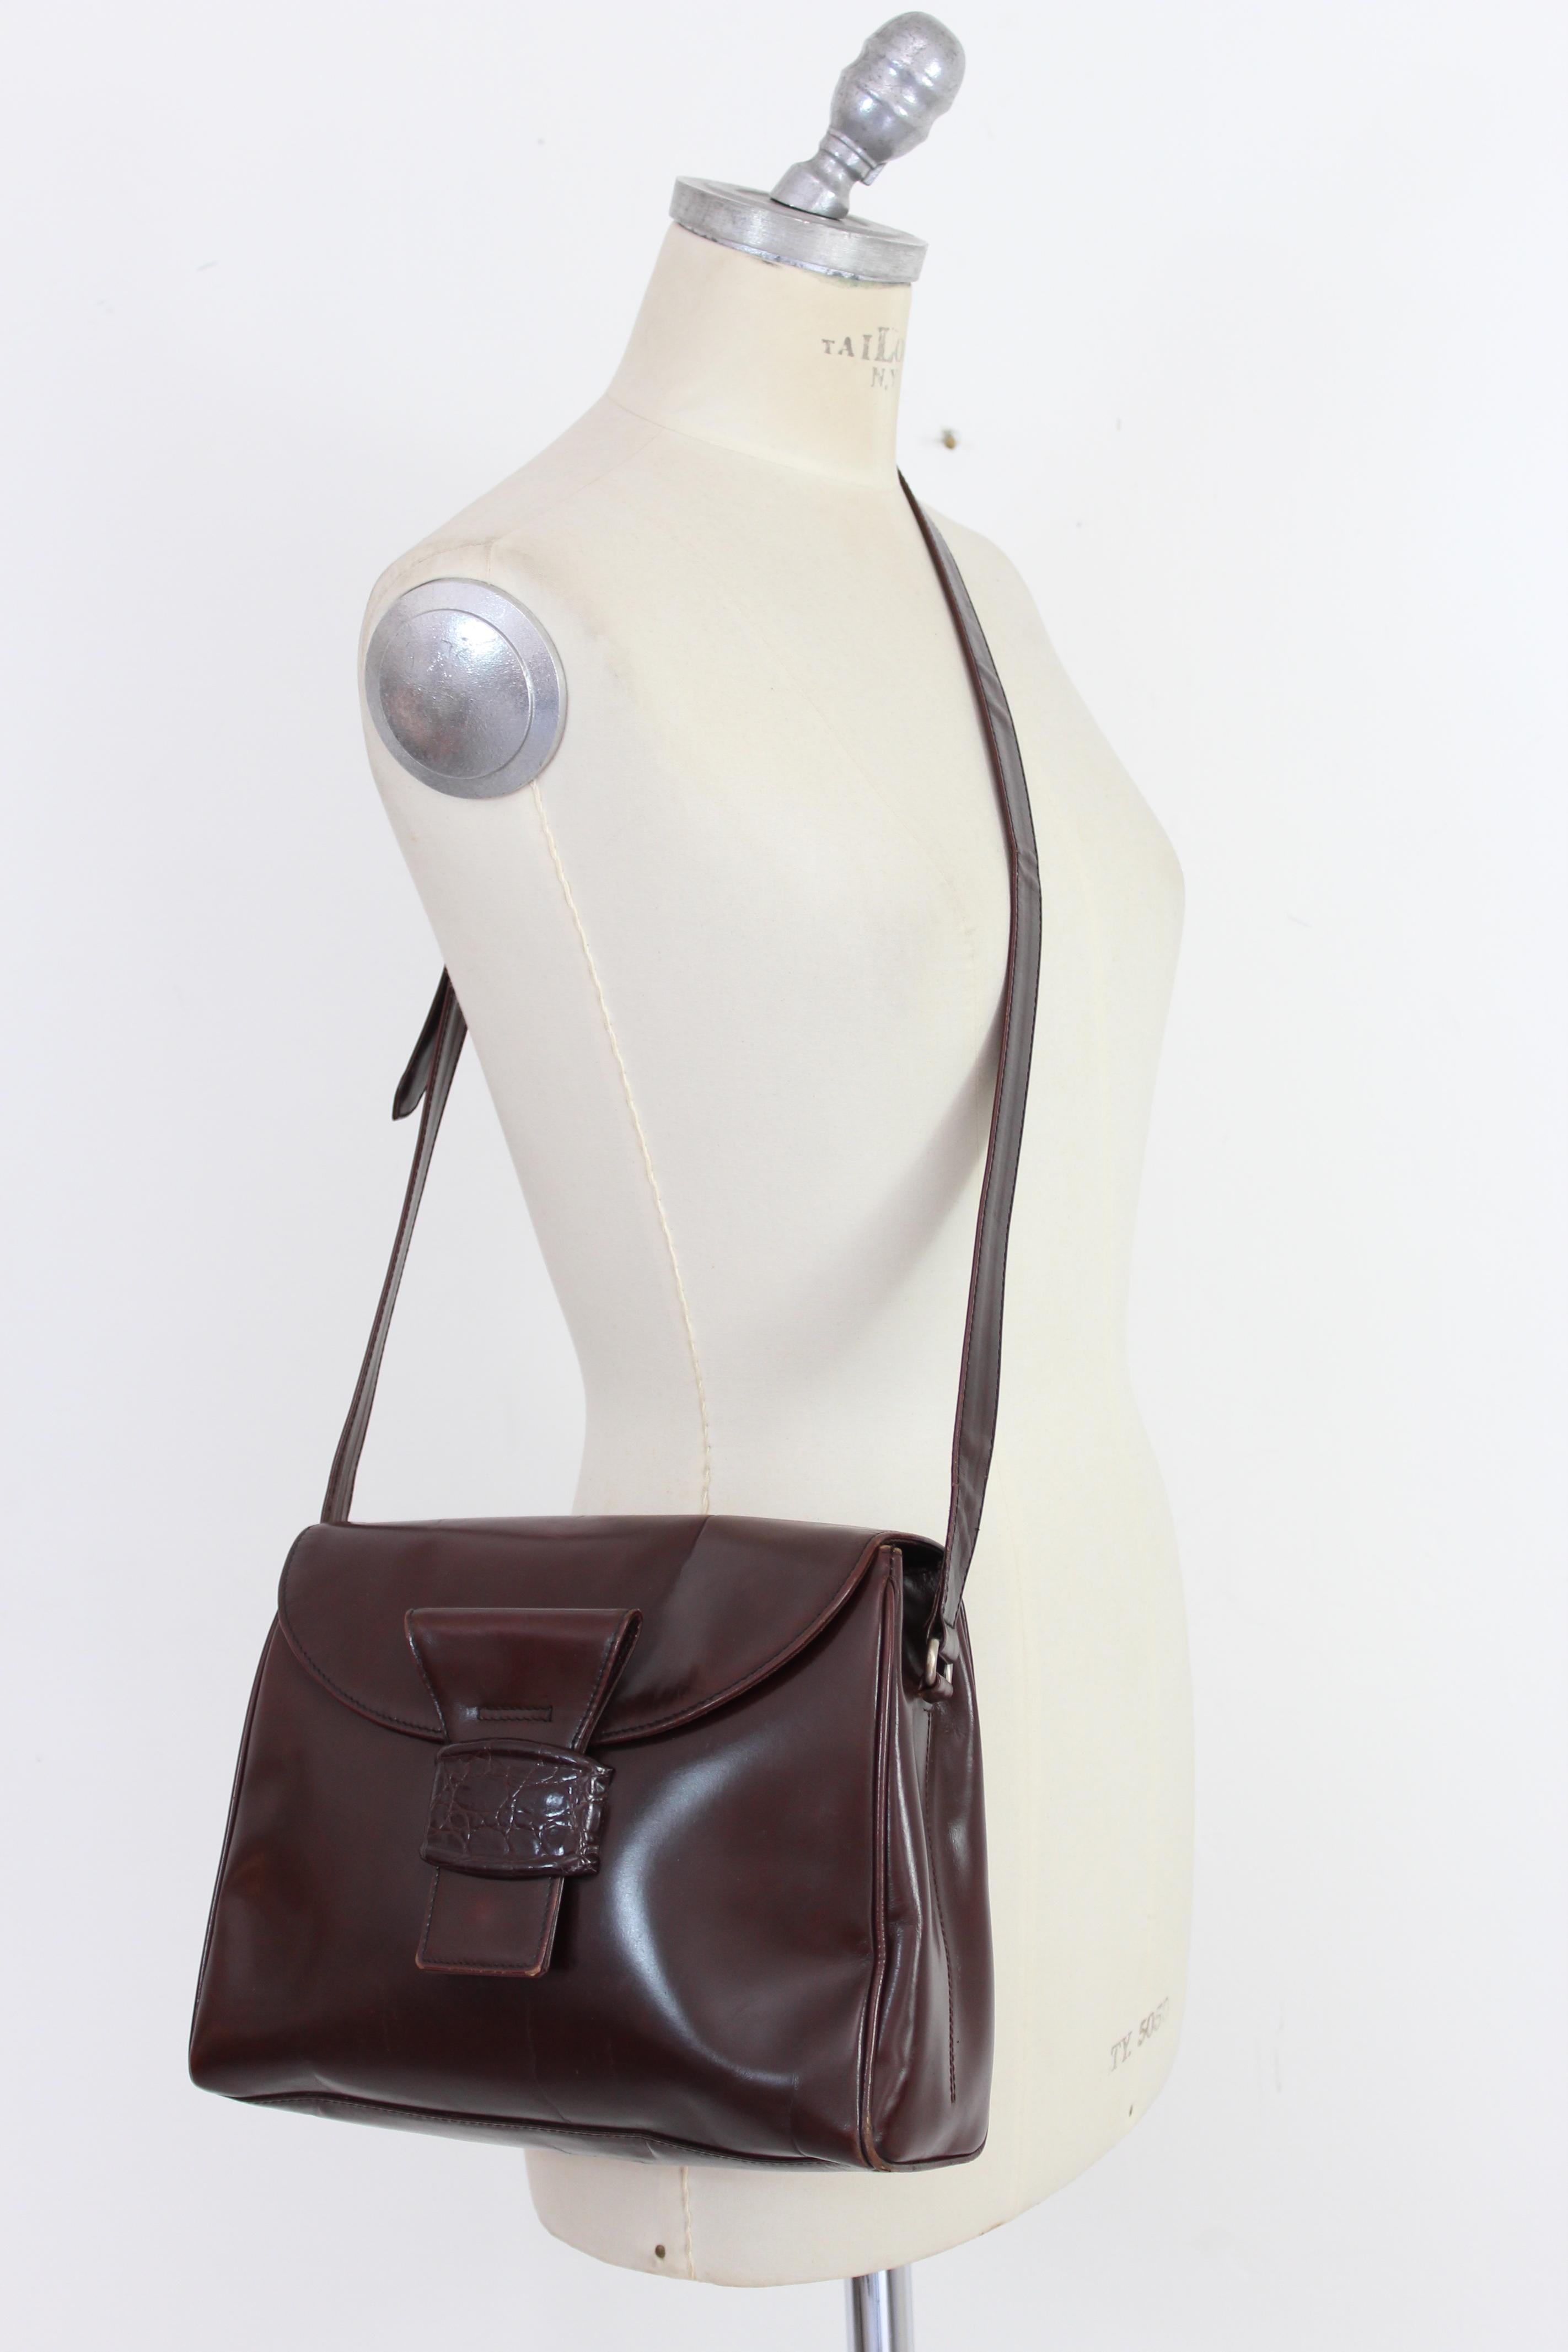 Prada 90s vintage bag. Shoulder bag with adjustable shoulder strap. Square rigid model, brown color, 100% leather. Clip button closure, inside pocket with zip closure. Made in Italy.

Condition: Very Good

This item has been used and is in excellent